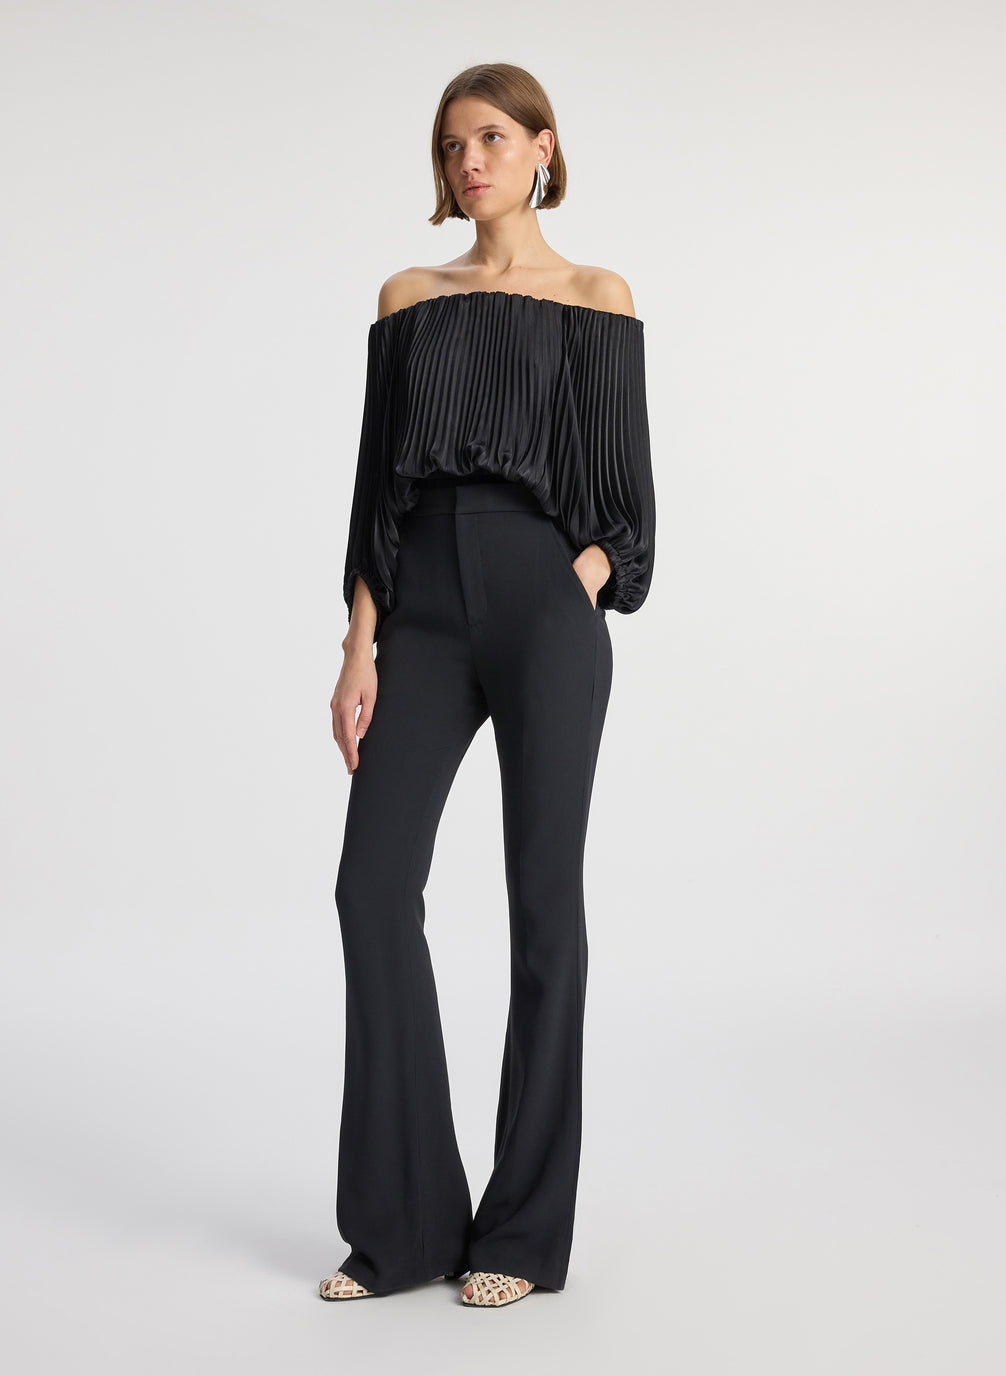 side view of woman wearing black satin pleated off the shoulder top with black pants